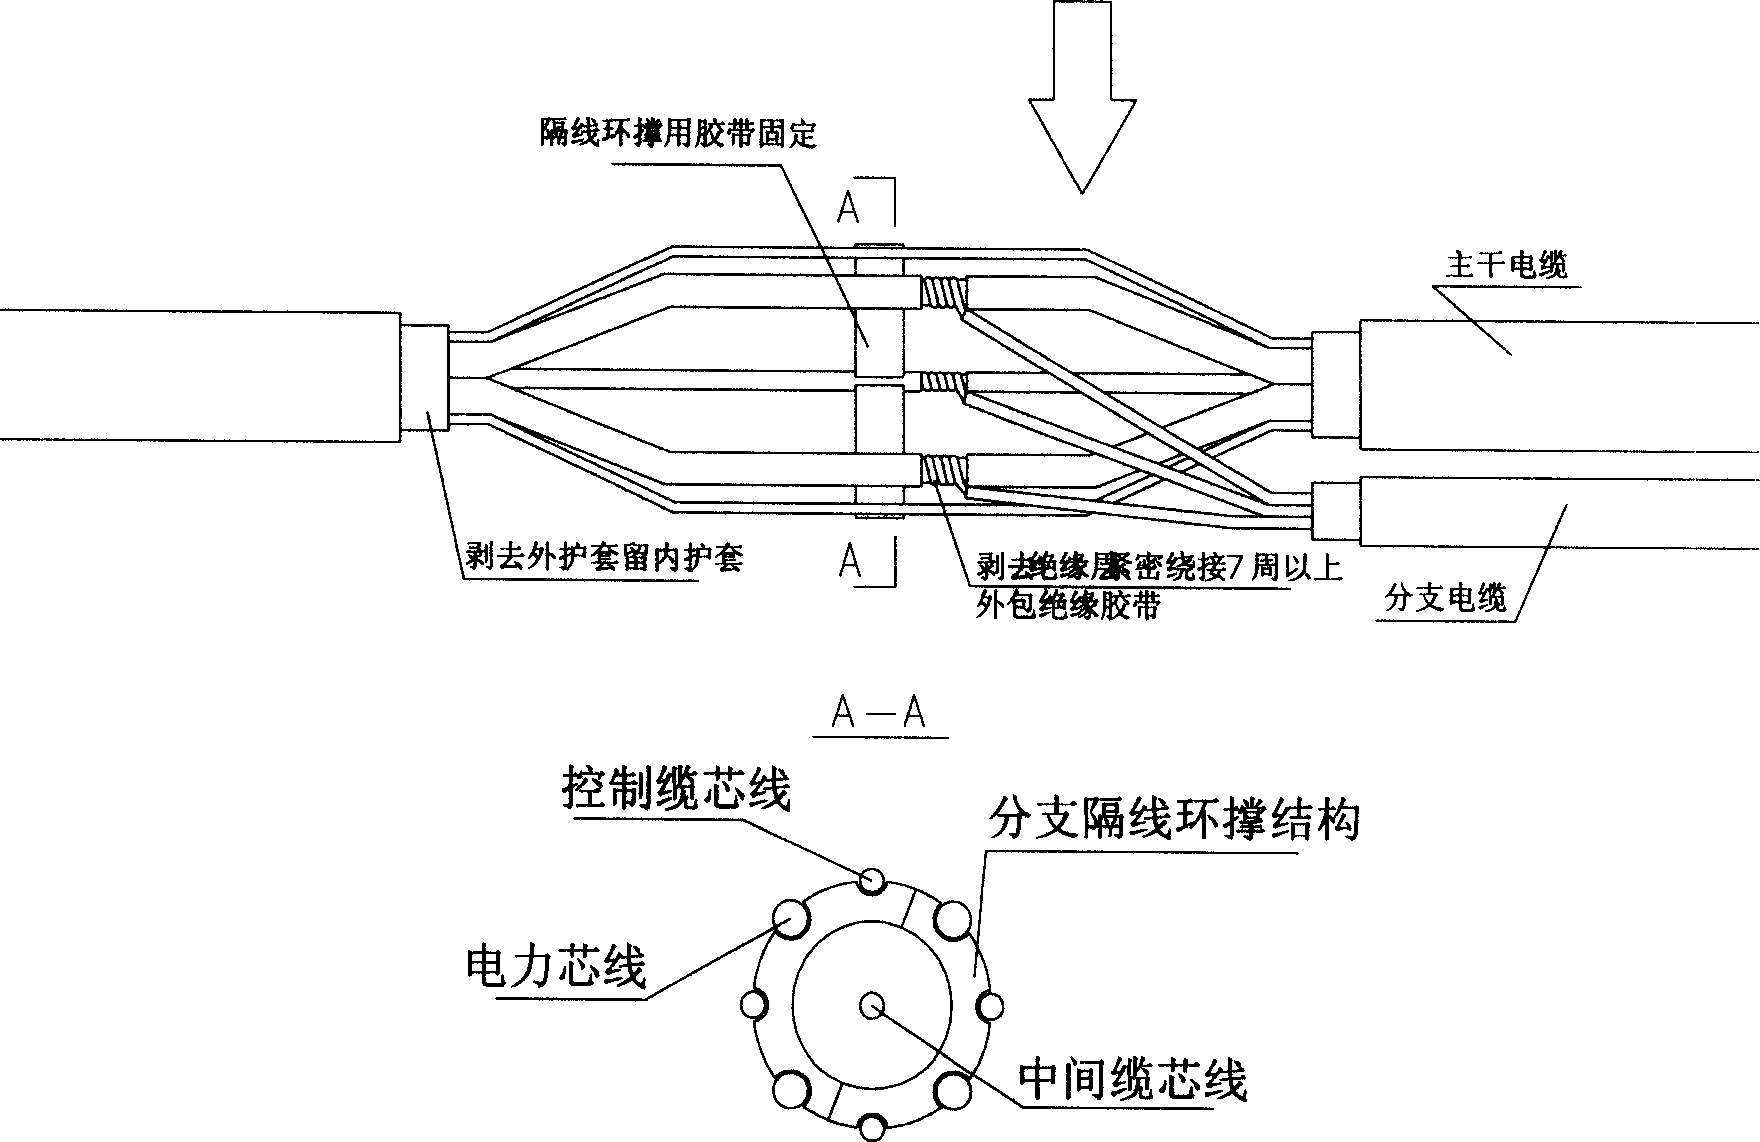 Method for branching cable joint and structure of ring support for spacing wire